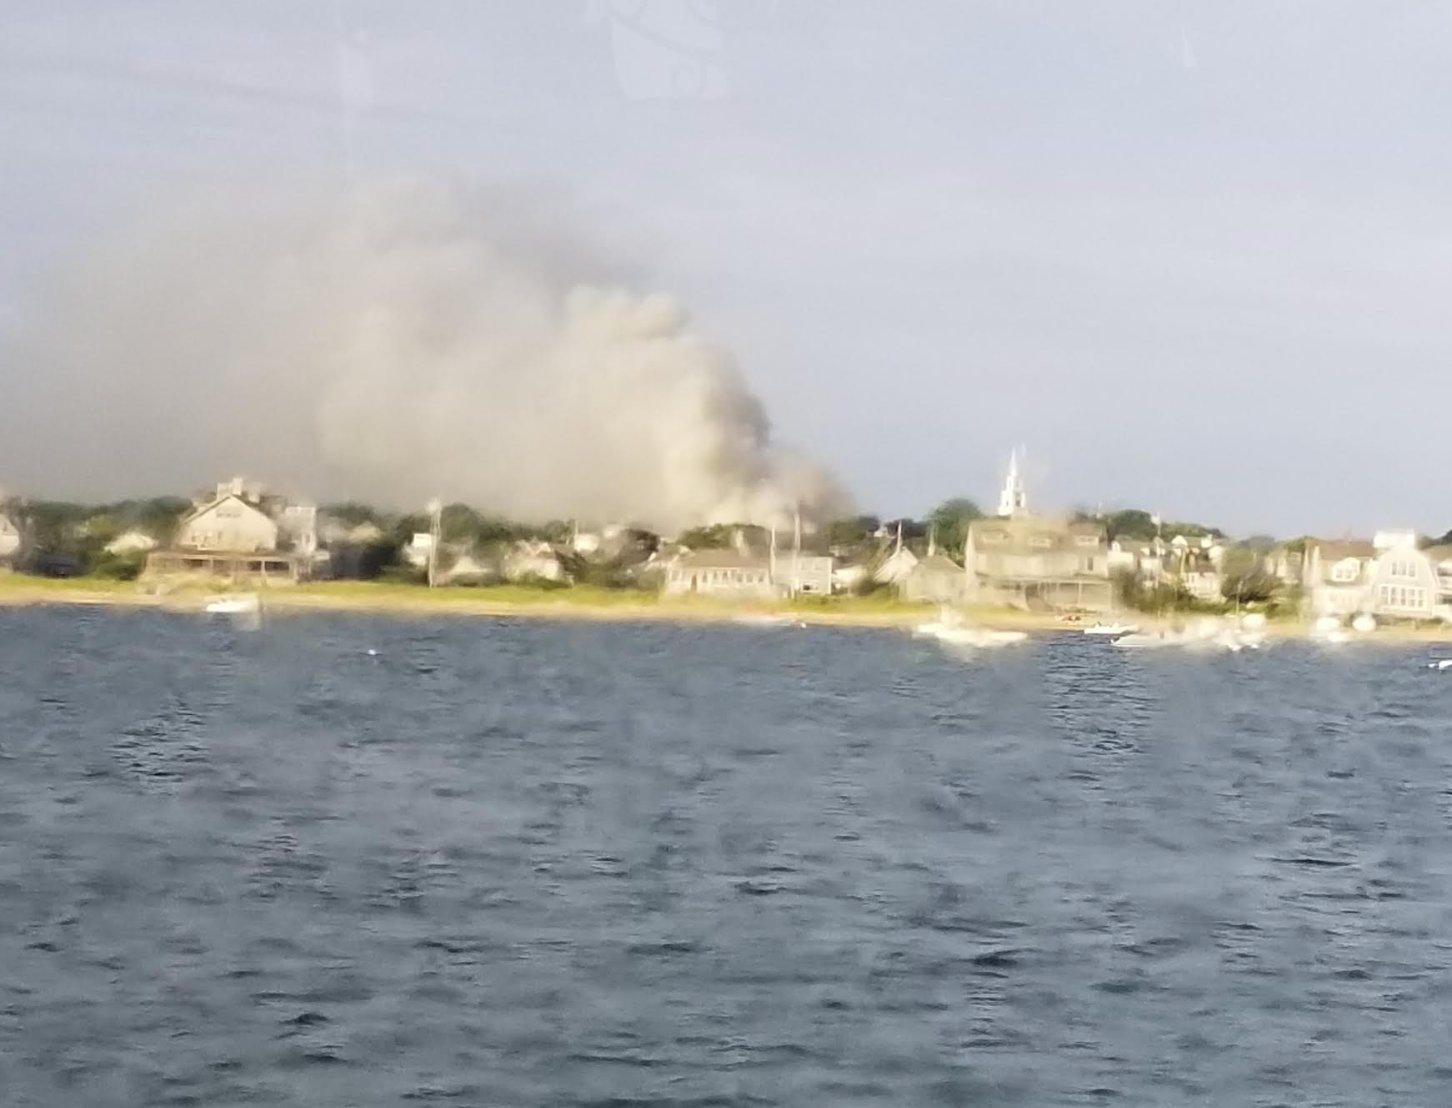 Smoke rises over the island as seen from the fast ferry Grey Lady heading into the harbor Saturday morning.